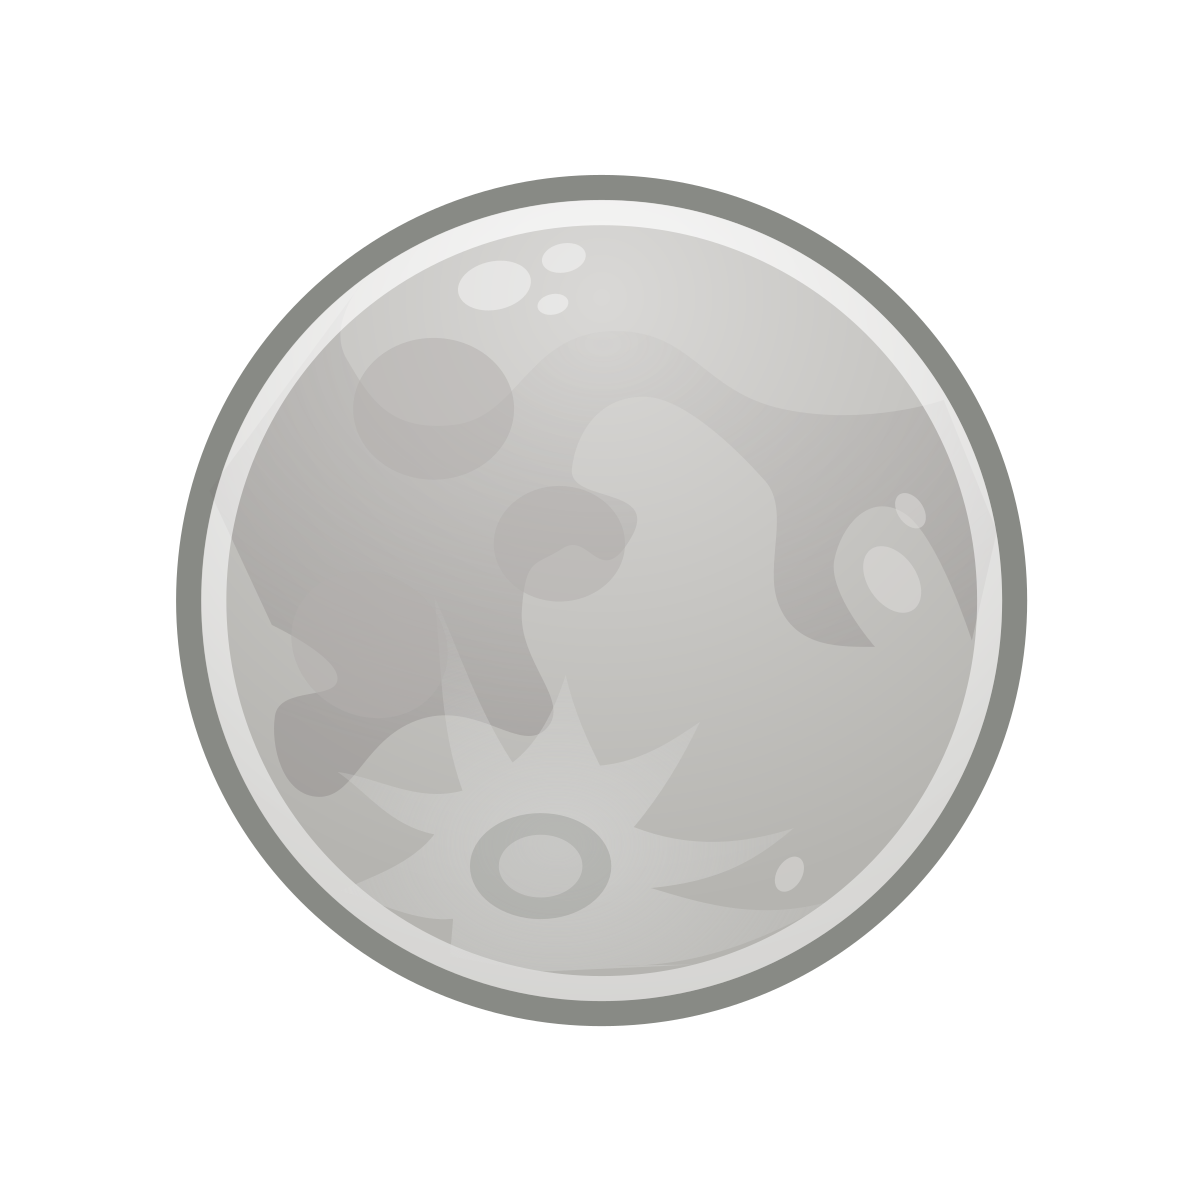 File:Weather icon - full moon.svg - Wikimedia Commons